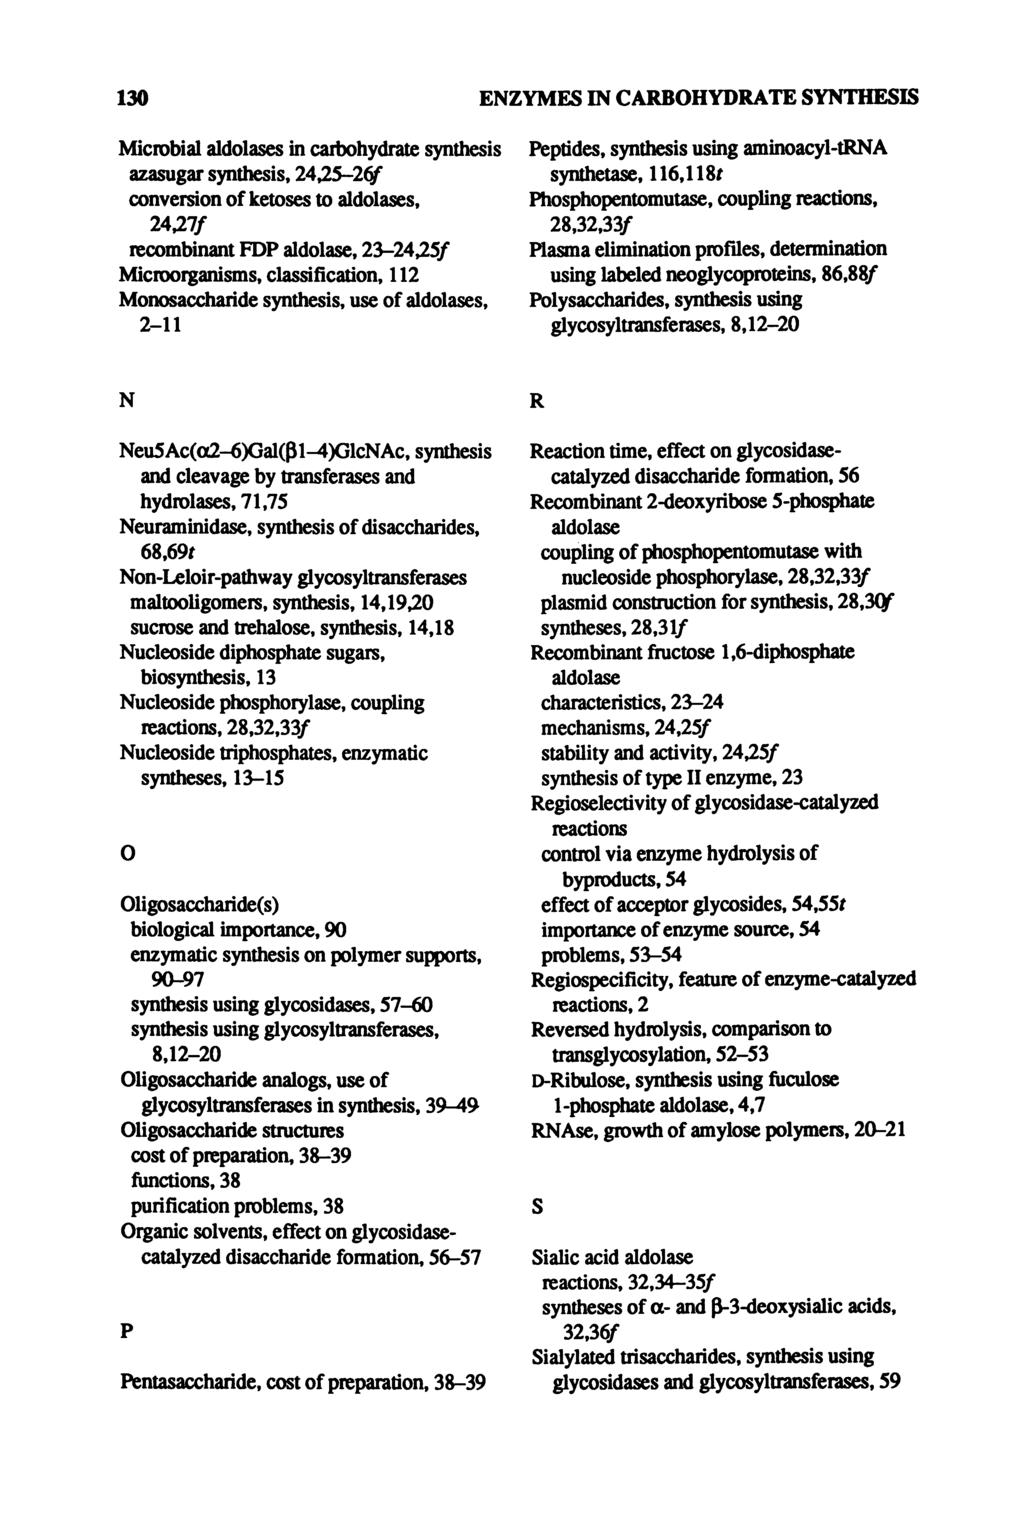 130 ENZYMES IN CARBOHYDRATE SYNTHESIS Microbial aldolases in carbohydrate synthesis azasugar synthesis, 24,25-26/ conversion of ketoses to aldolases, 24,27/ recombinant FDP aldolase, 23-24,25/